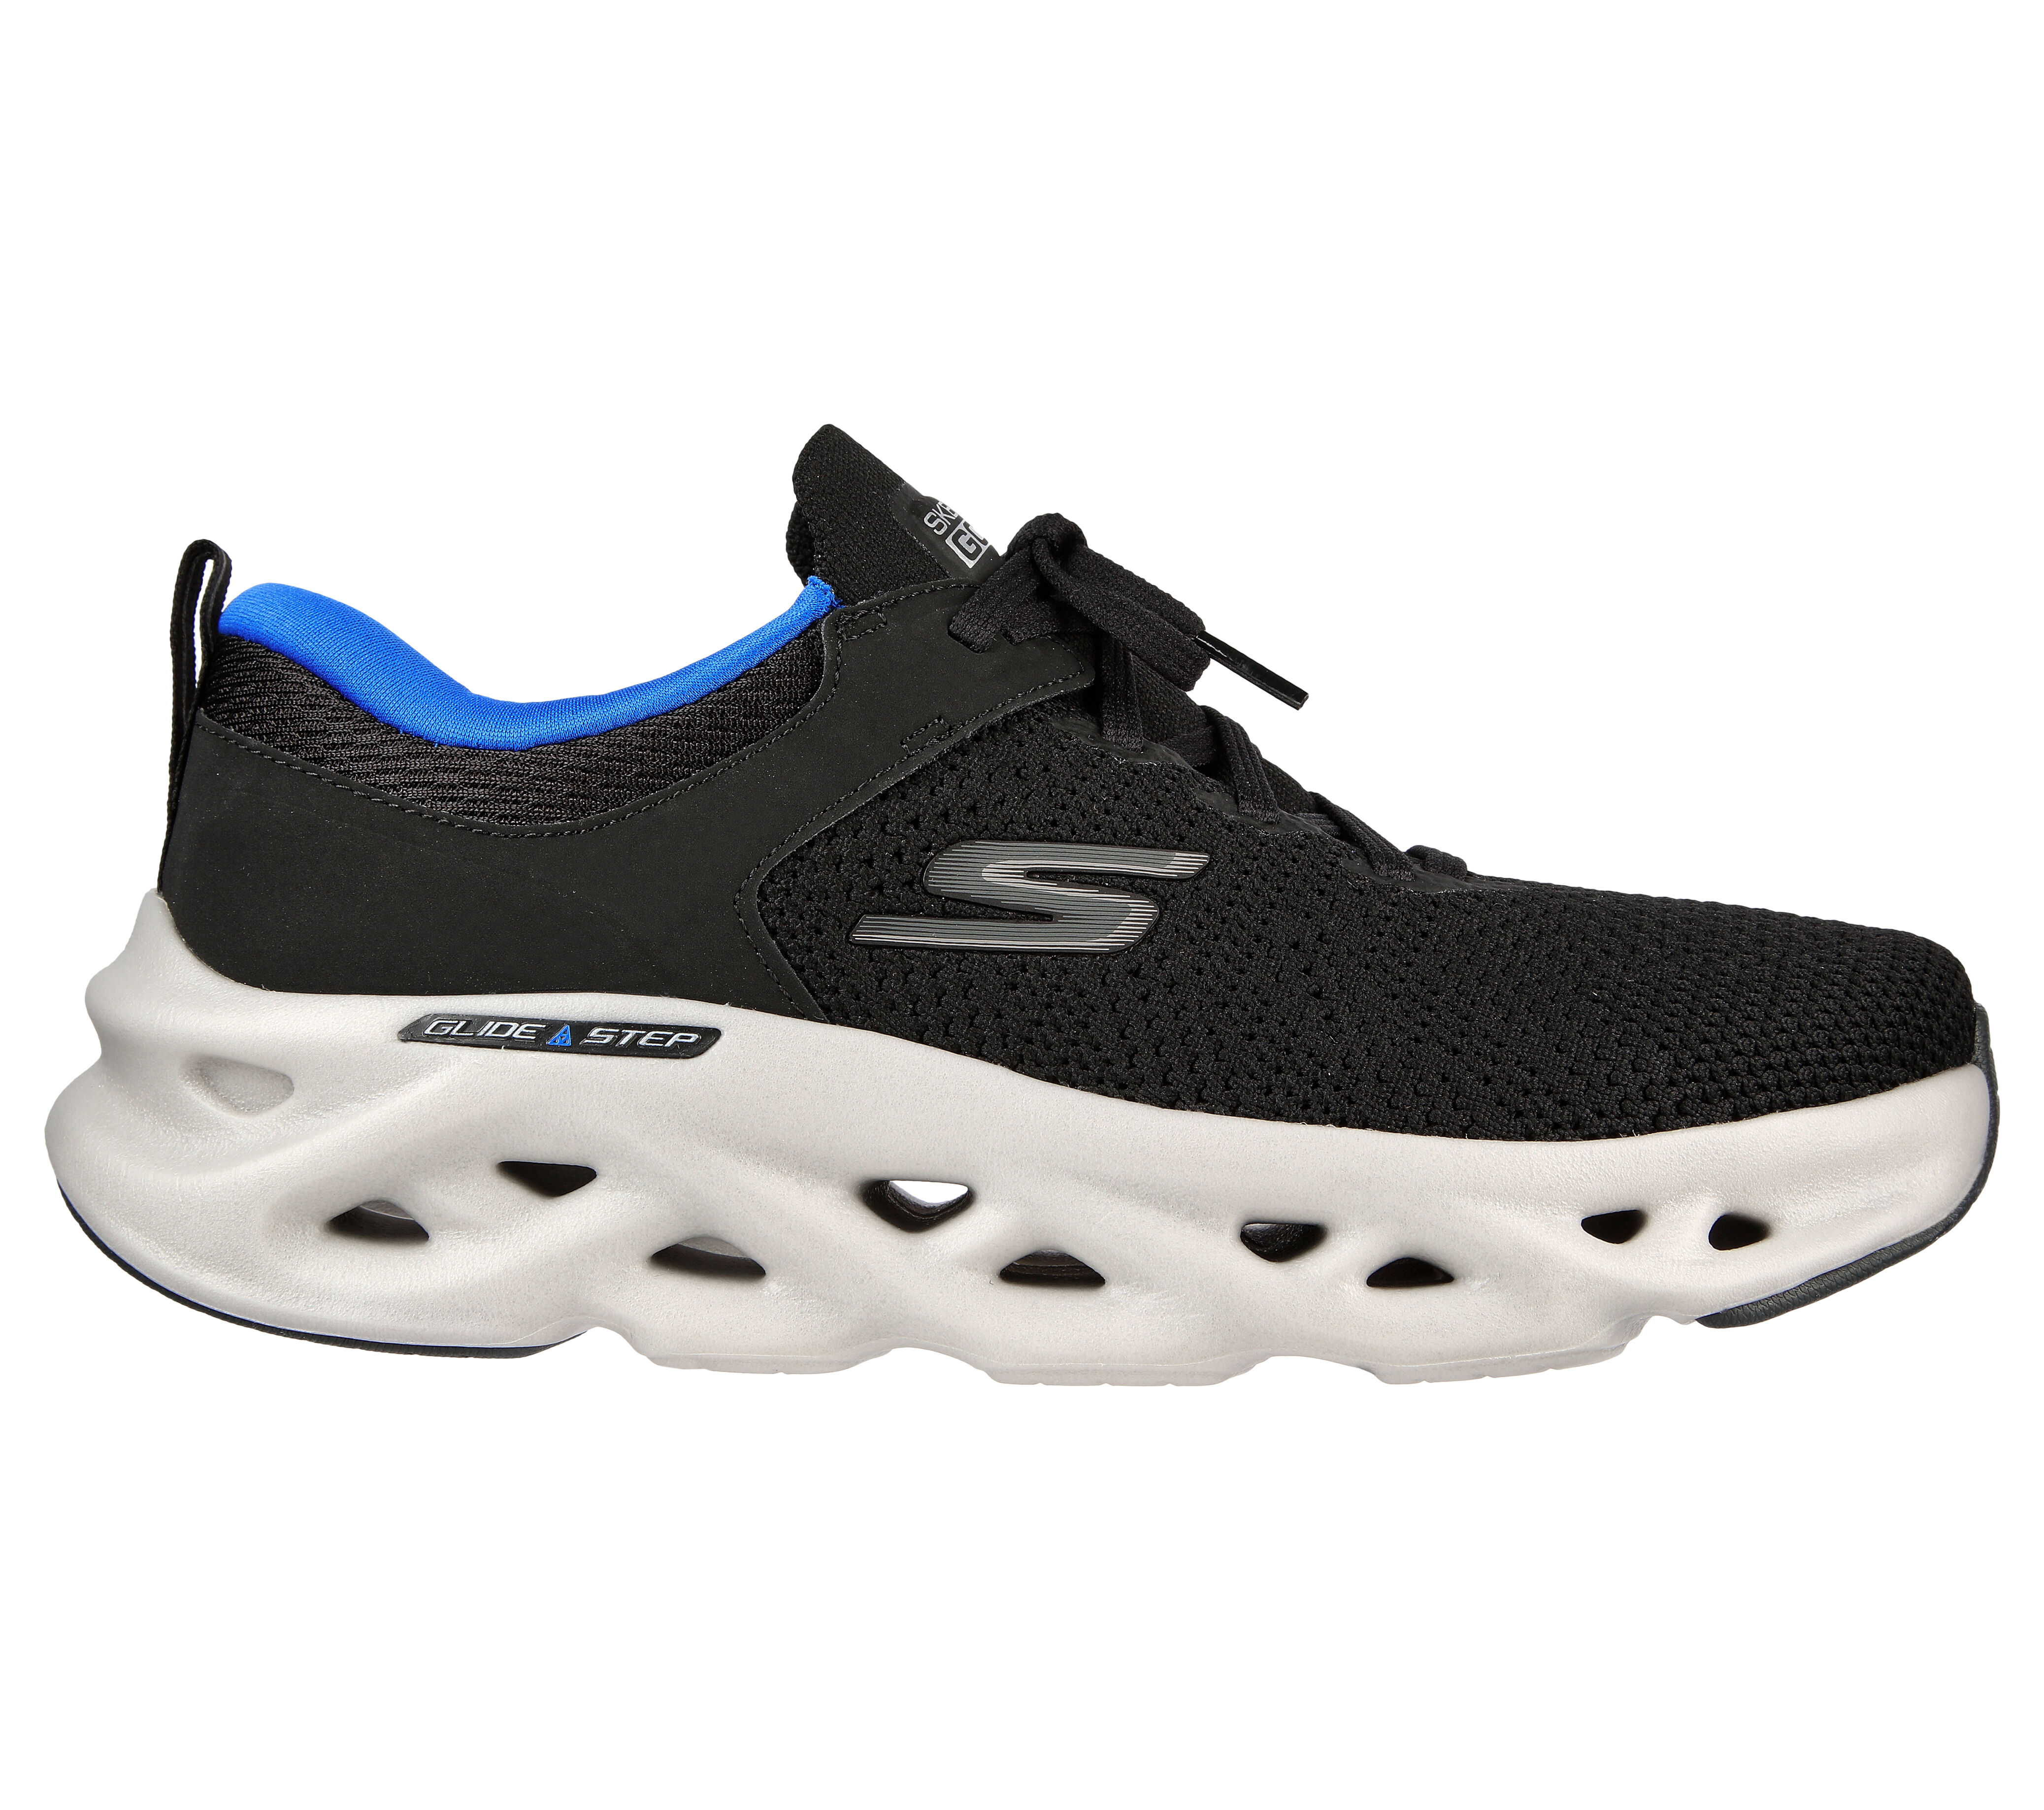 Skechers Running Shoes Canada SAVE 58%.